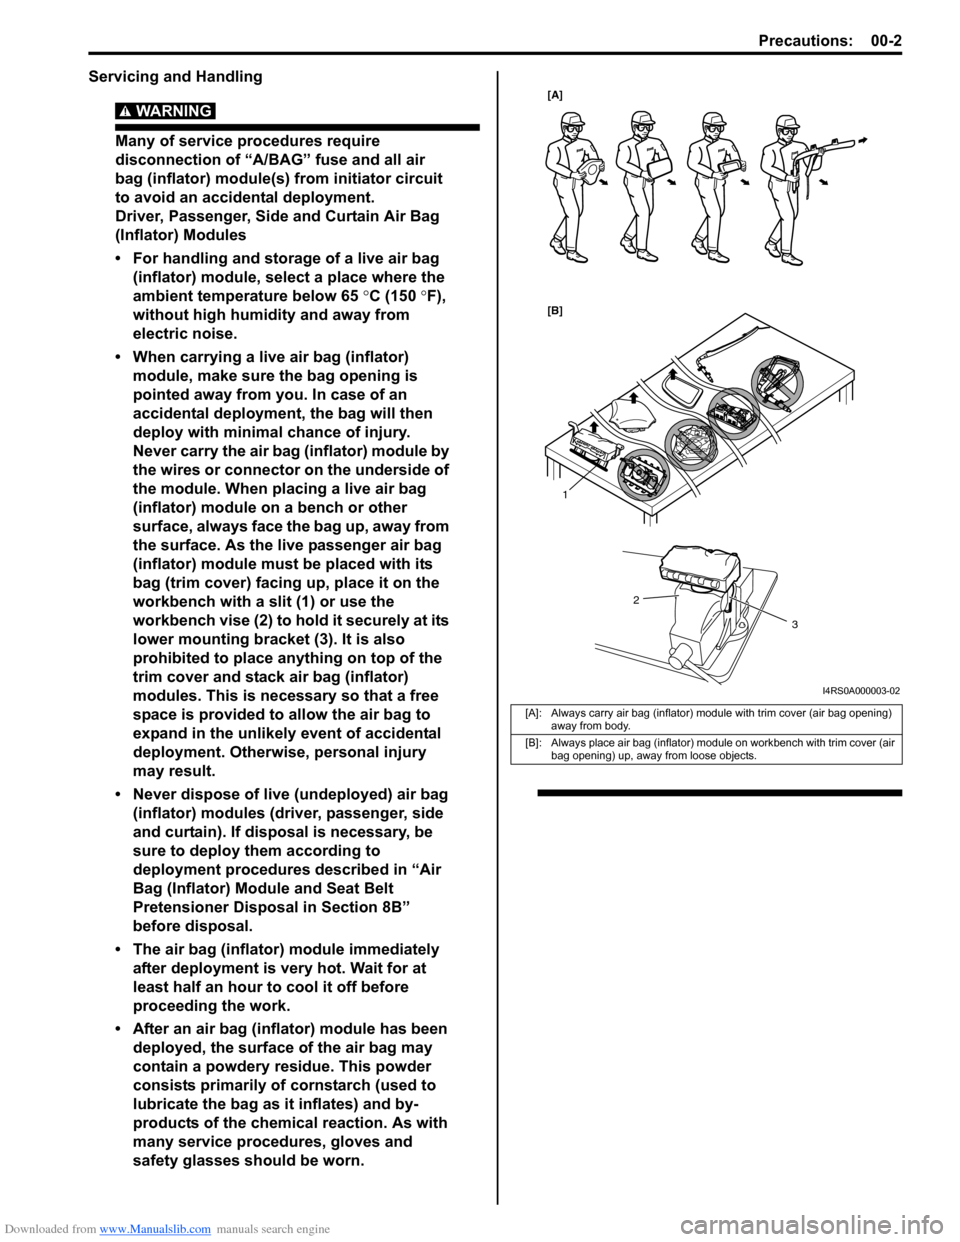 SUZUKI SWIFT 2008 2.G Service Workshop Manual Downloaded from www.Manualslib.com manuals search engine Precautions: 00-2
Servicing and Handling
WARNING! 
Many of service procedures require 
disconnection of “A/BAG” fuse and all air 
bag (infl